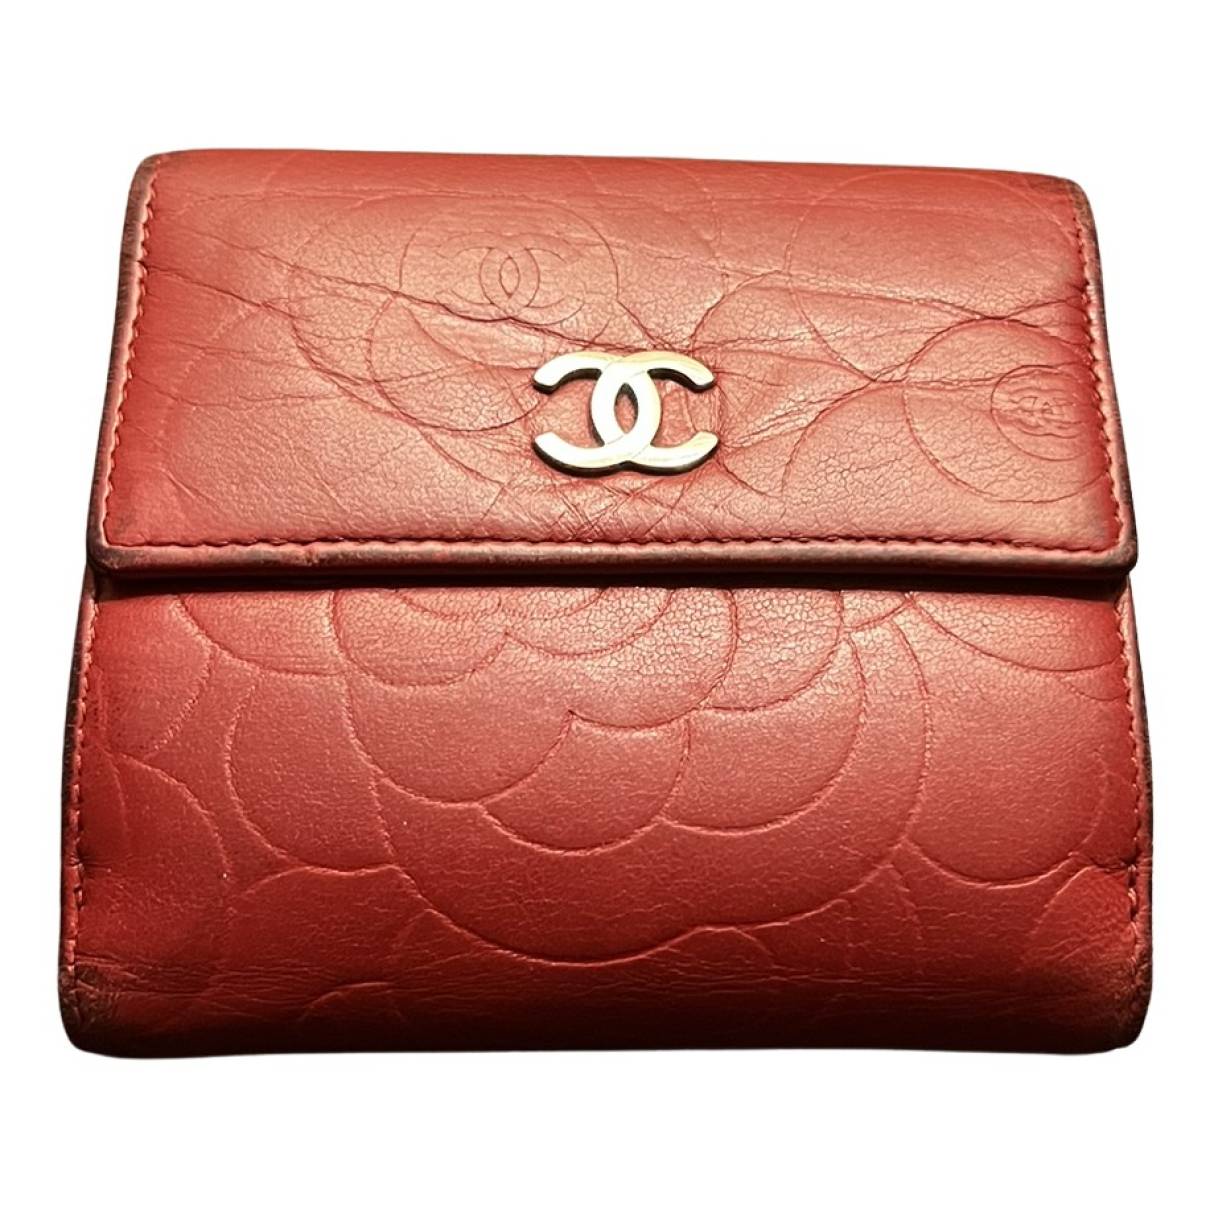 Timeless/classique leather wallet Chanel Red in Leather - 35321936